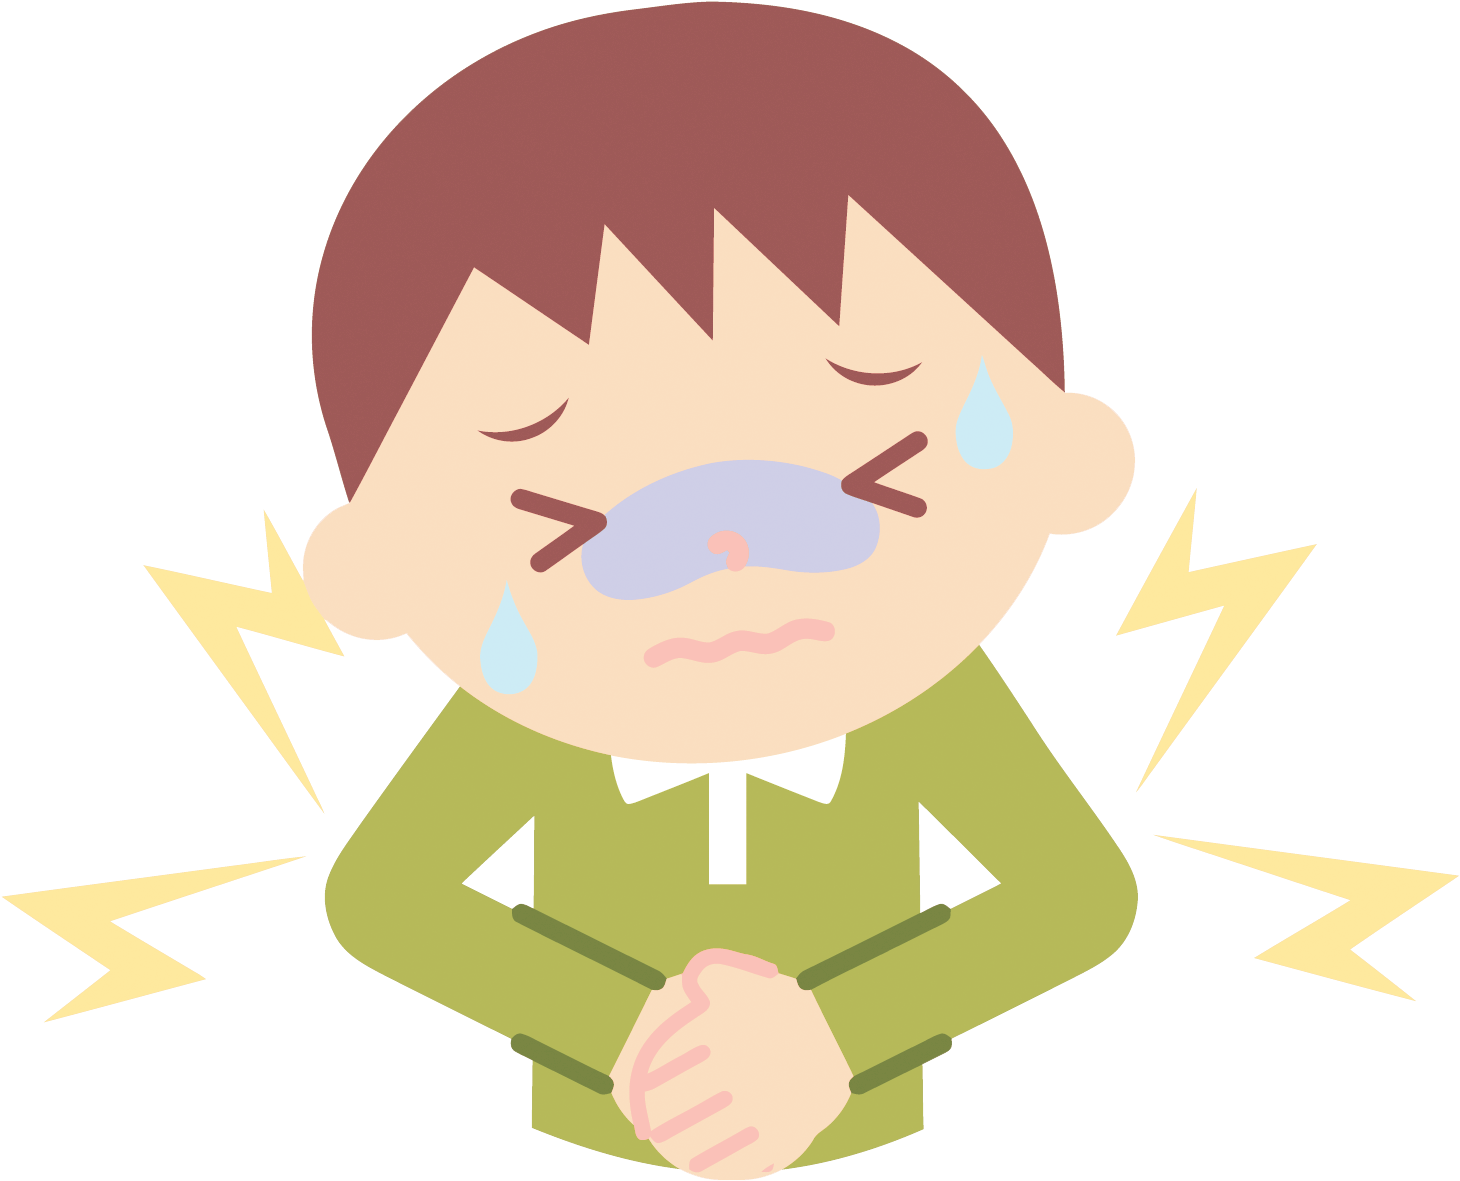 Download and share clipart about Abdominal Pain Cartoon Toothache Child - S...